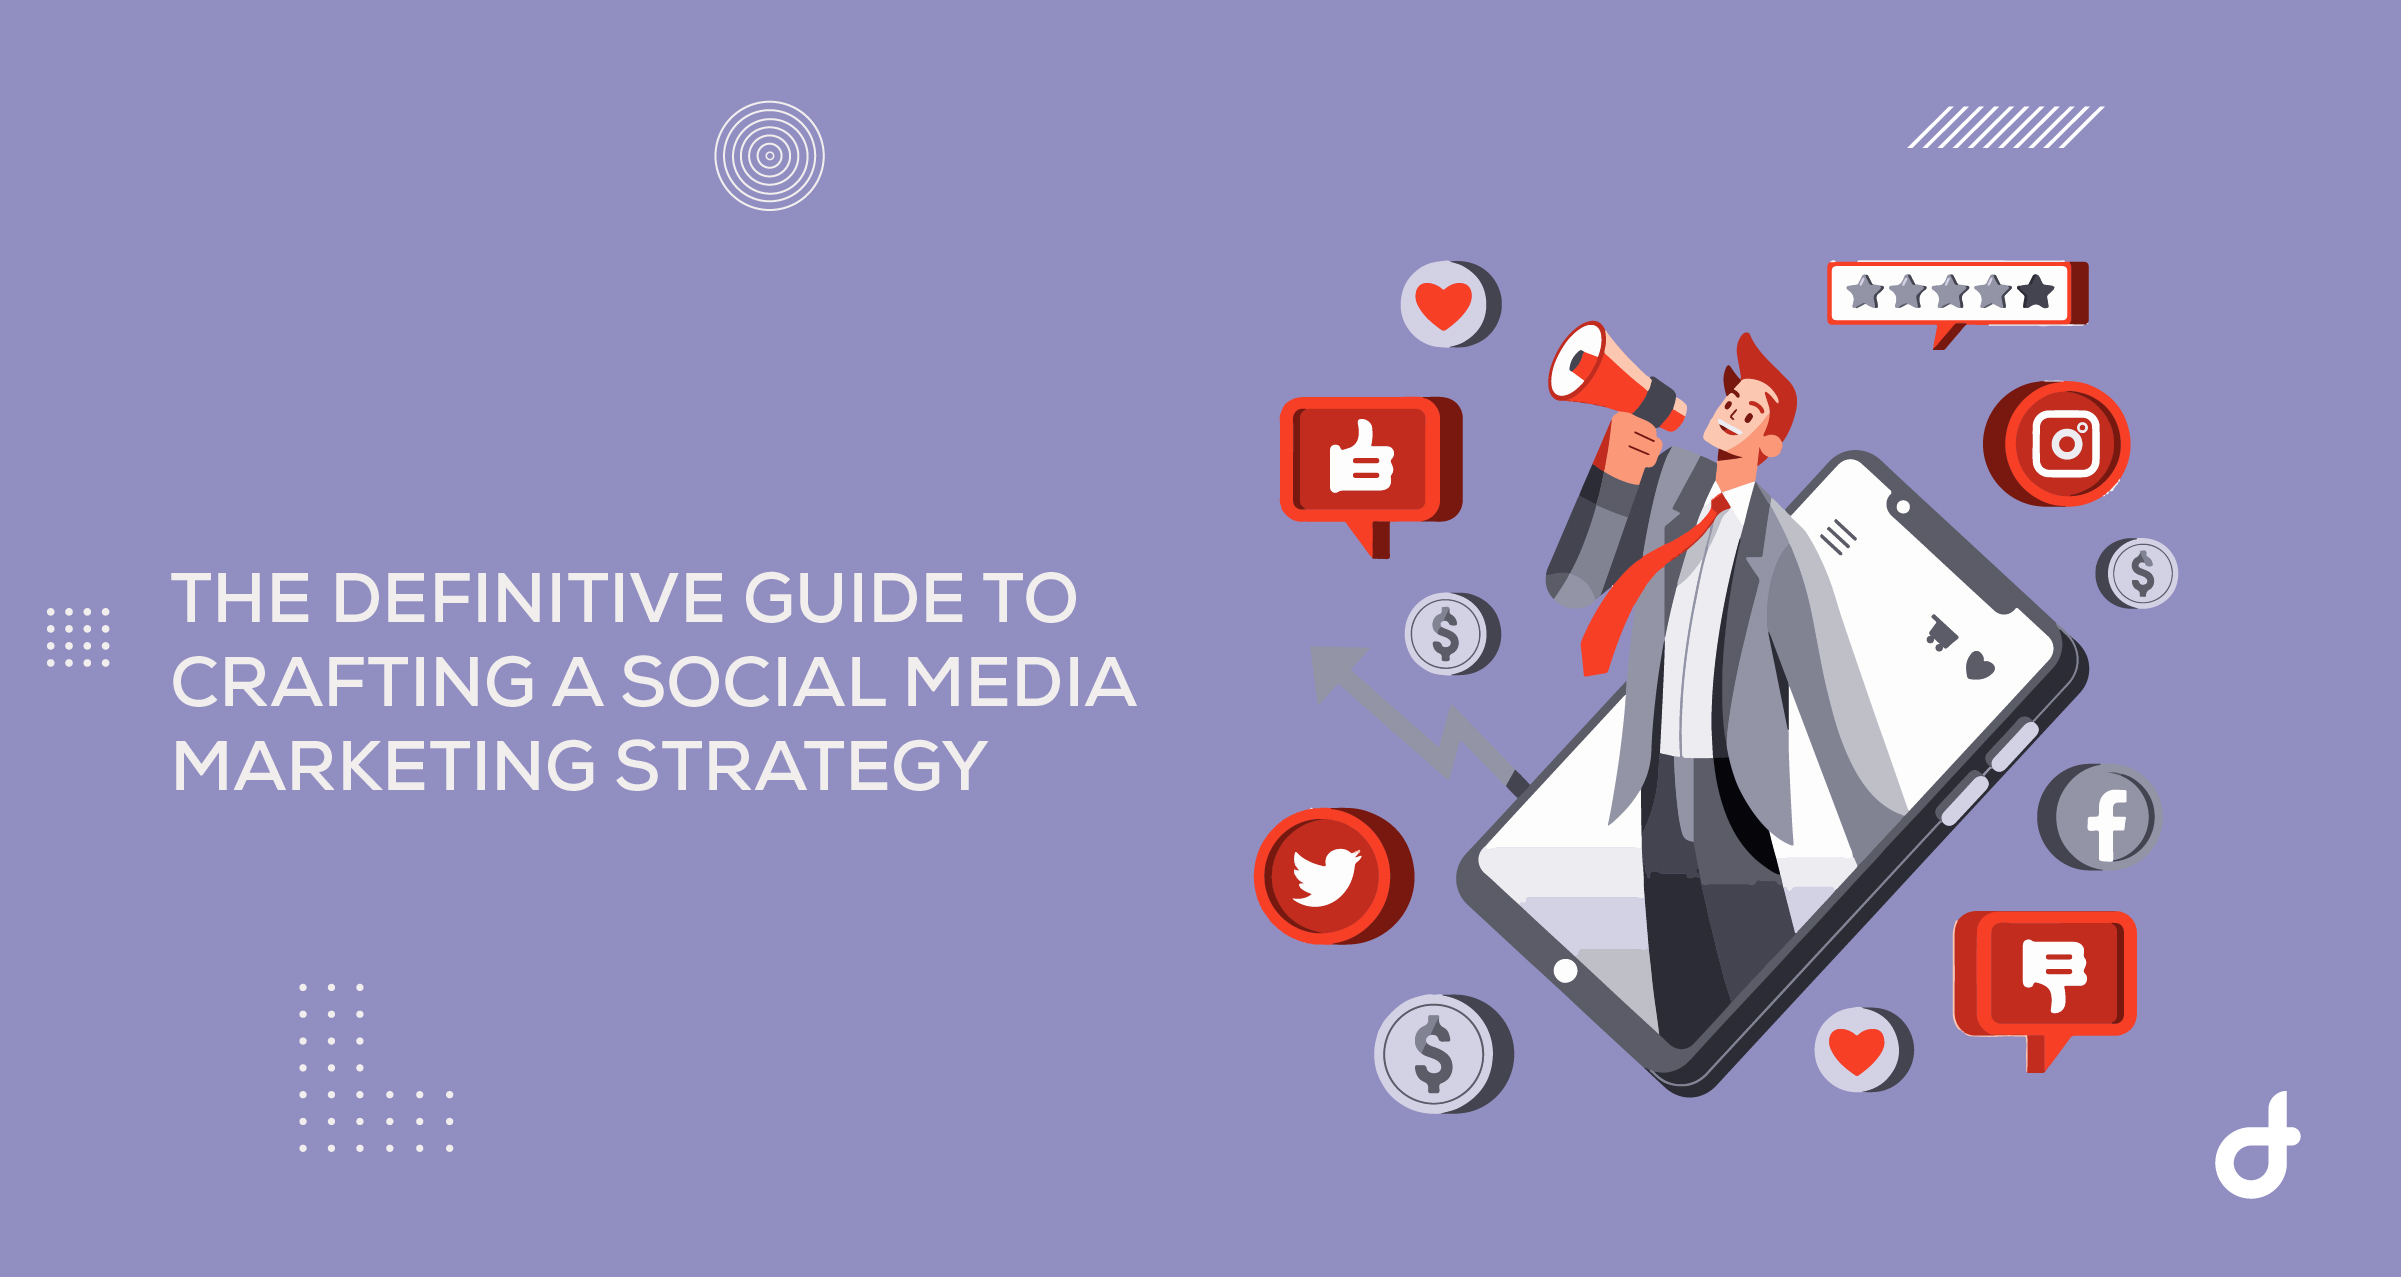 The Definitive Guide to Crafting a Social Media Marketing Strategy